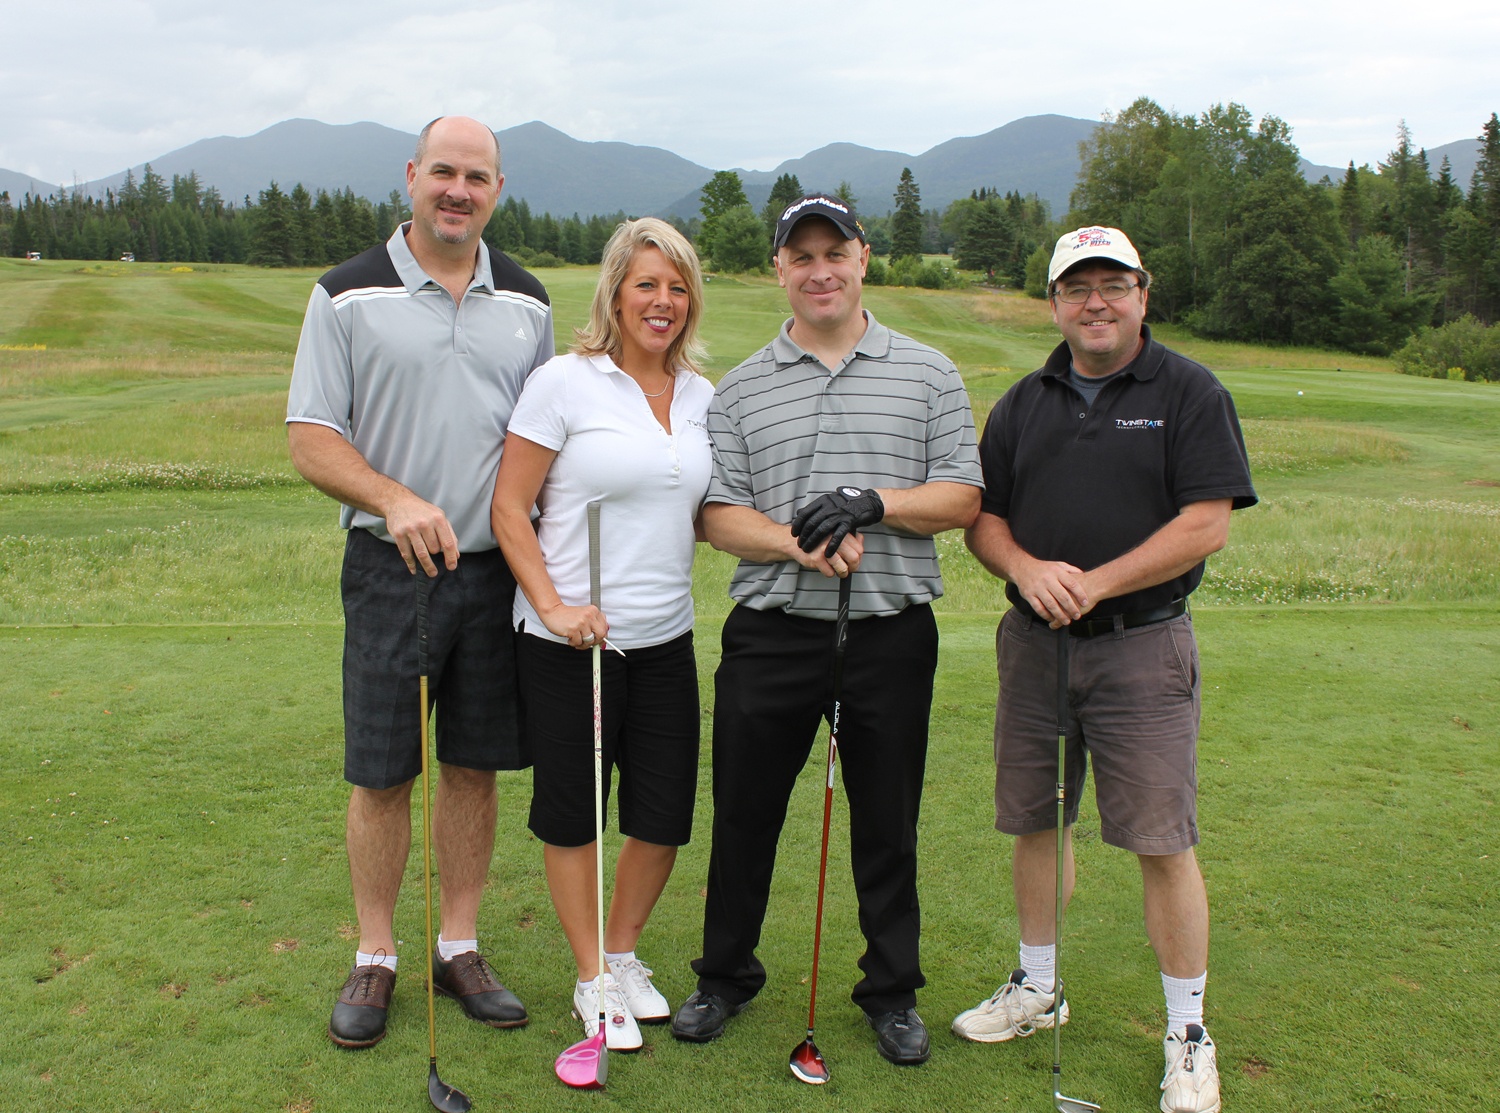 Twinstate - A Charity Golf Tournament Supporter